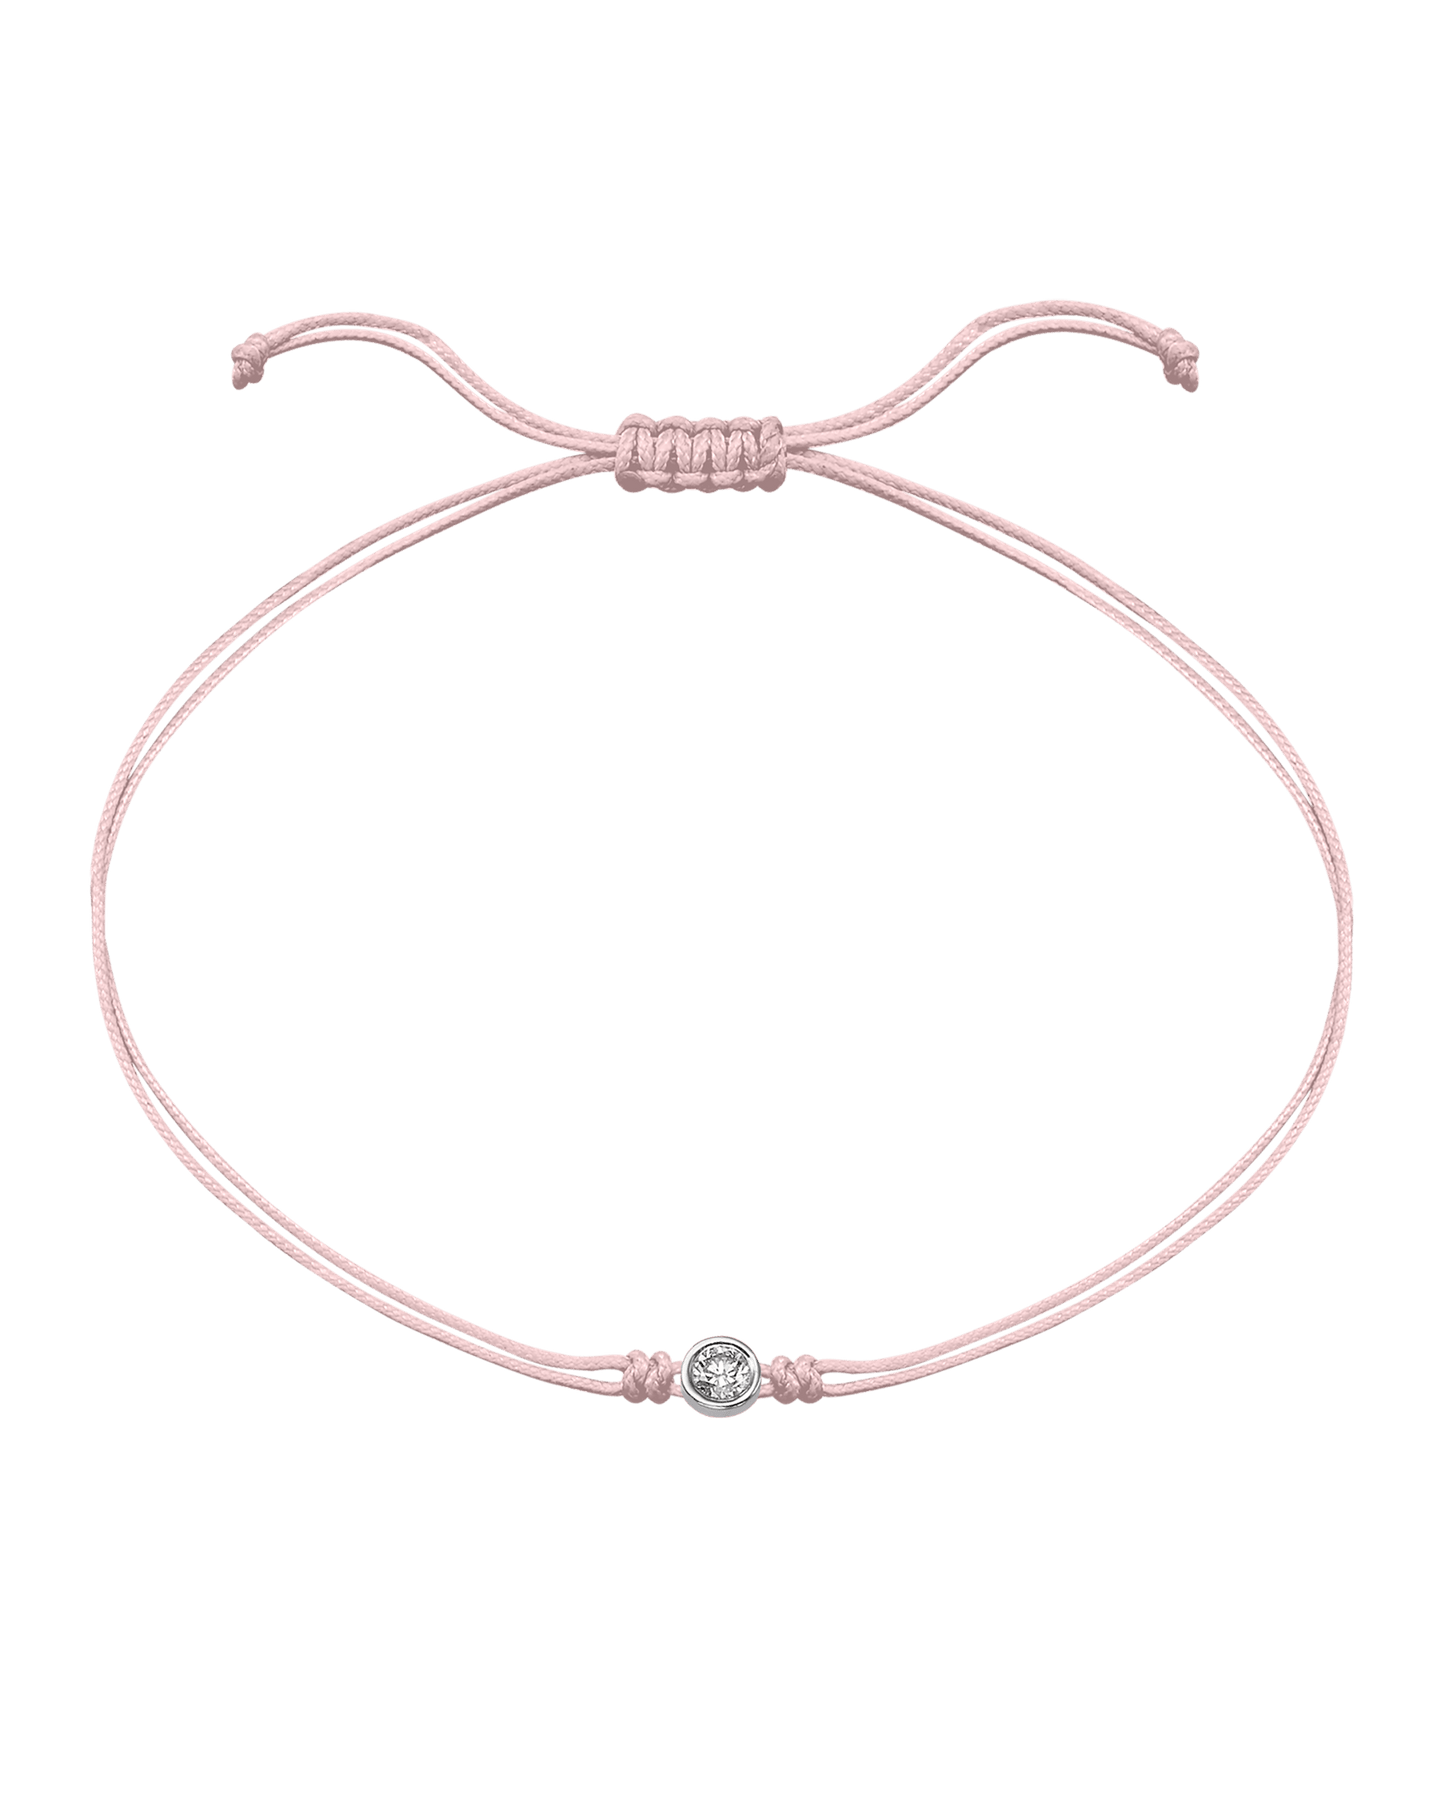 Summer Edition : The Classic String of Love - 14K White Gold Bracelets magal-dev Strawberry Bellini - Light Pink Large: 0.10ct 